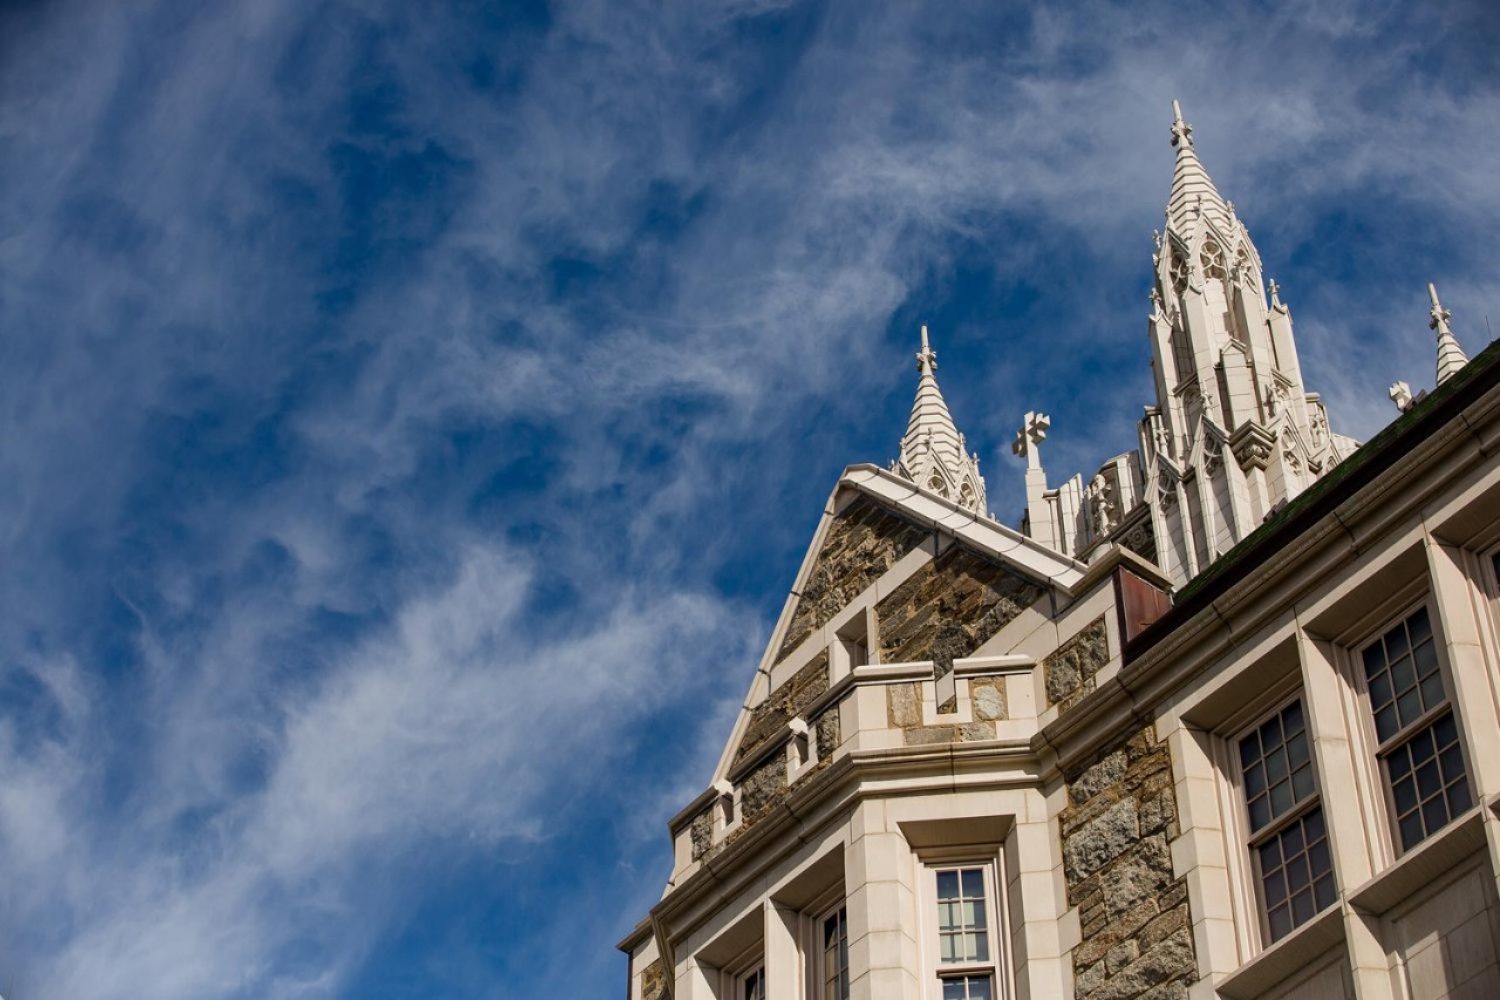 Gasson Hall tower against blue sky